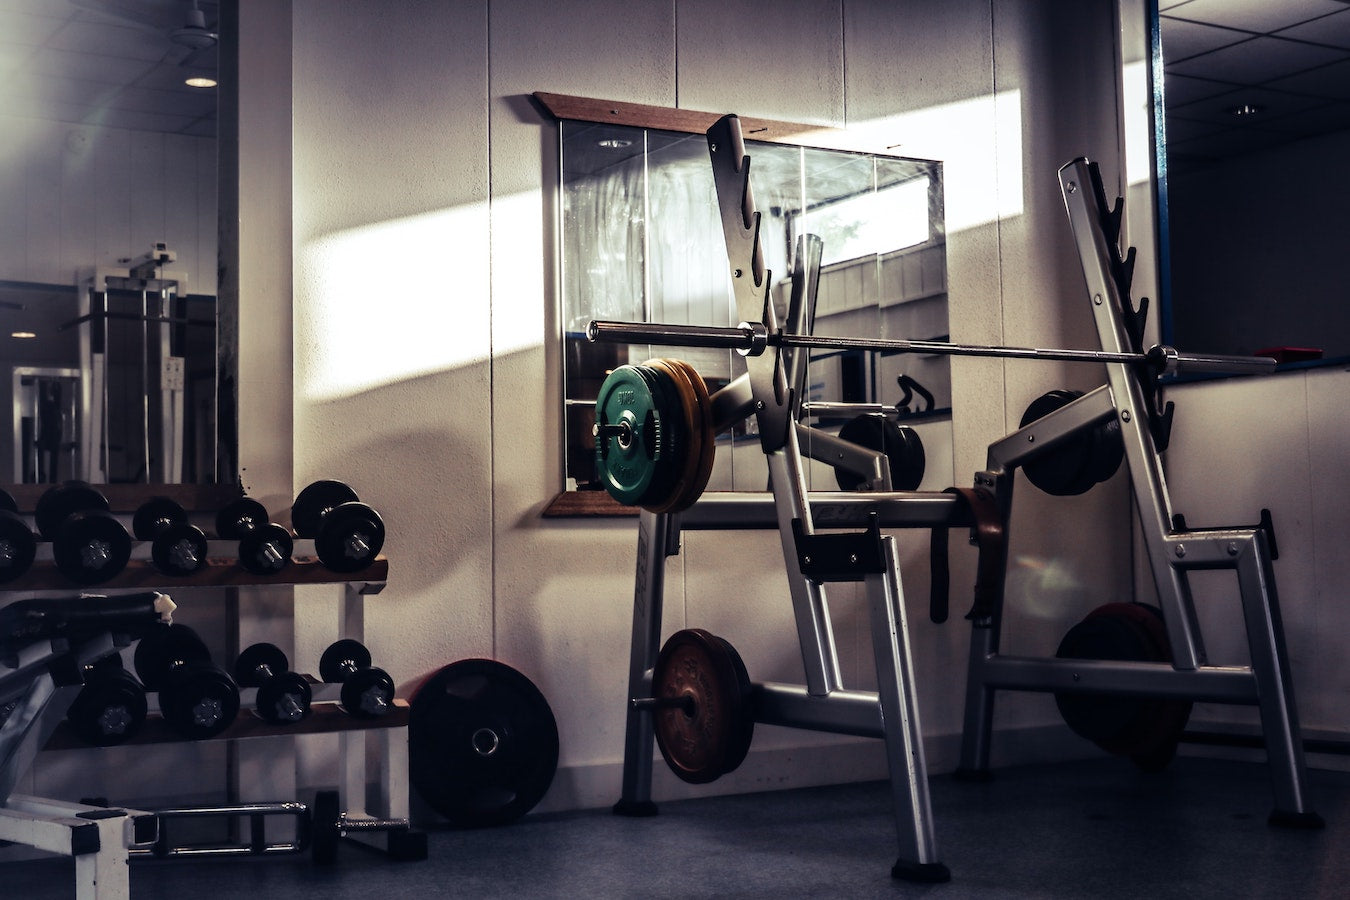 How To Find A Gym That Works For You